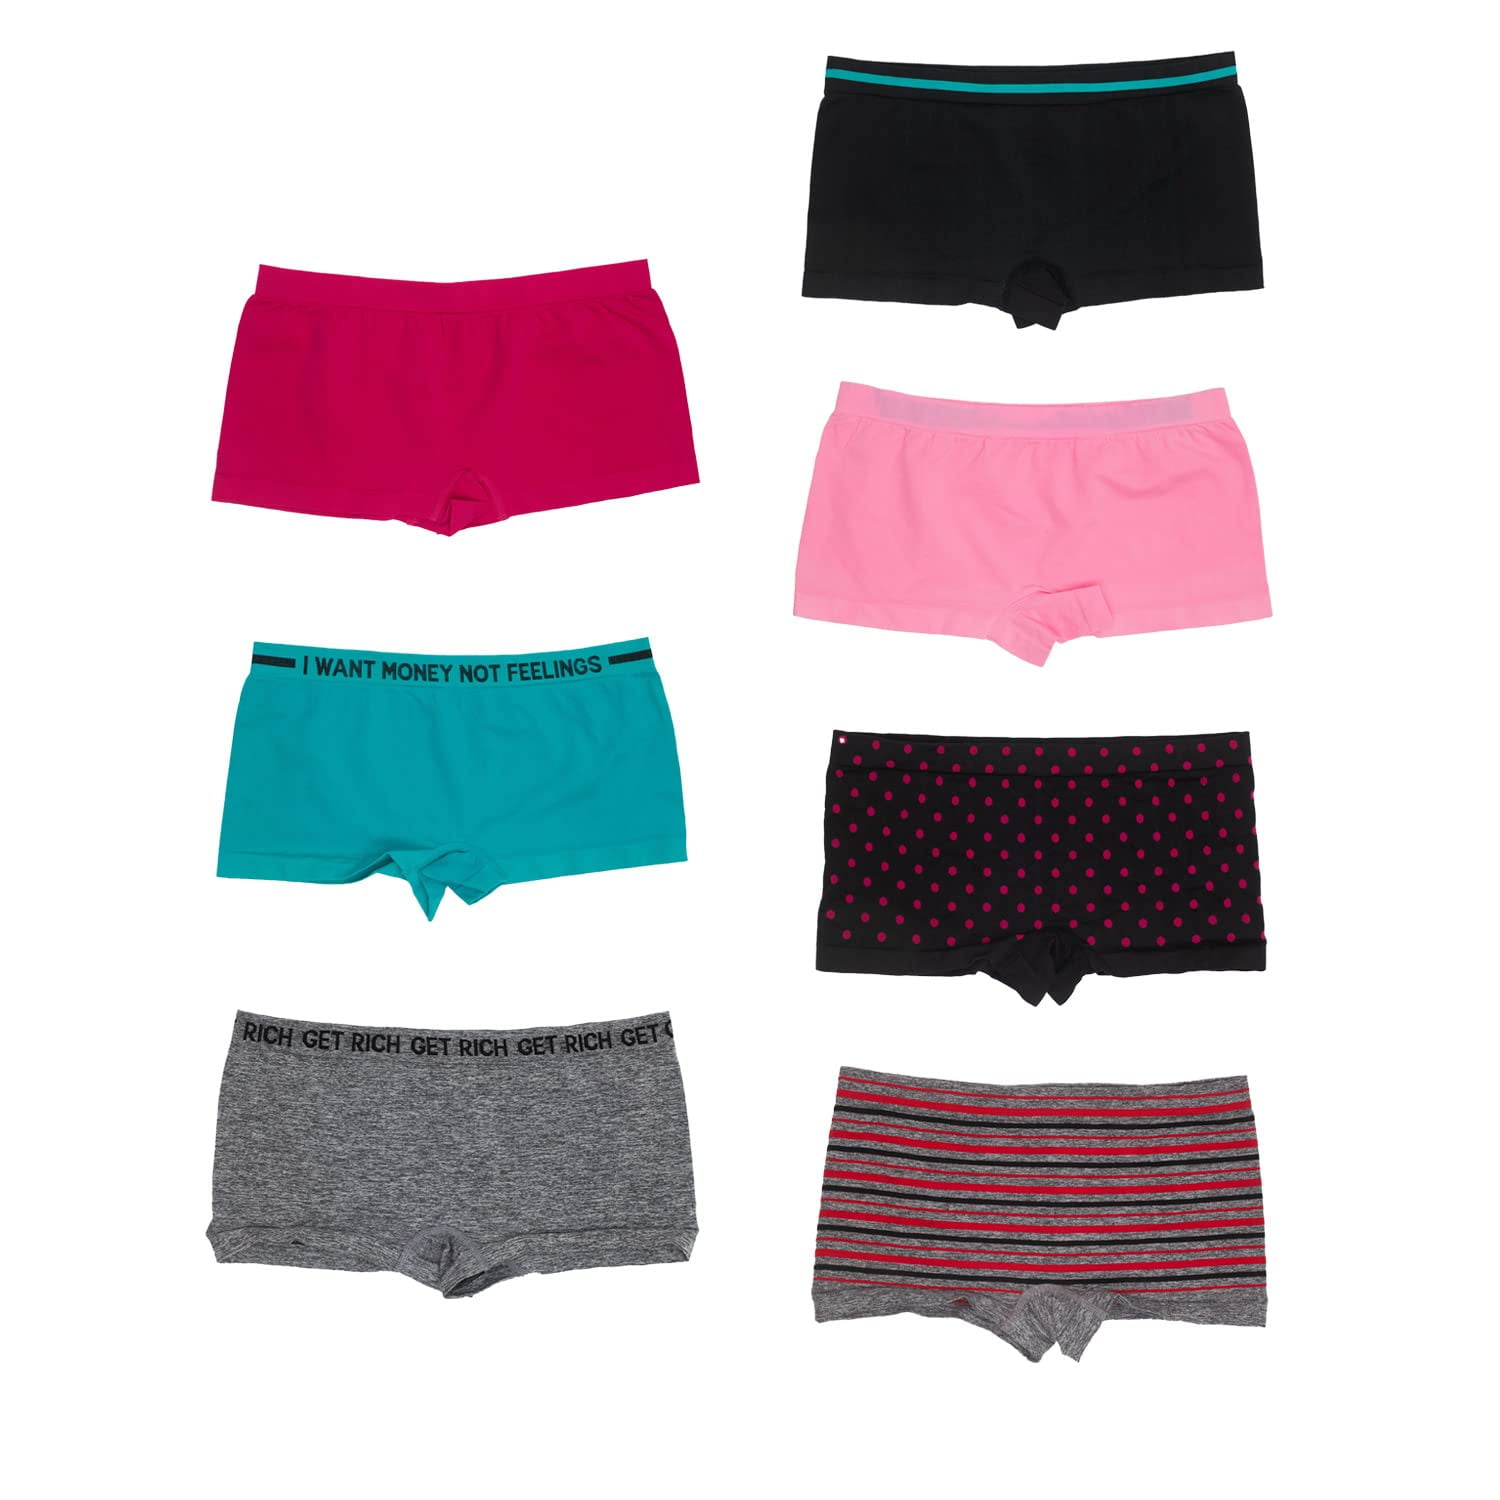 Womens Cotton Waist Shorts Cute Variety Pack Of Pretty Butt Enhancer Panties  With Long Boy Shafts For A Stylish Look From Damangguo, $13.05